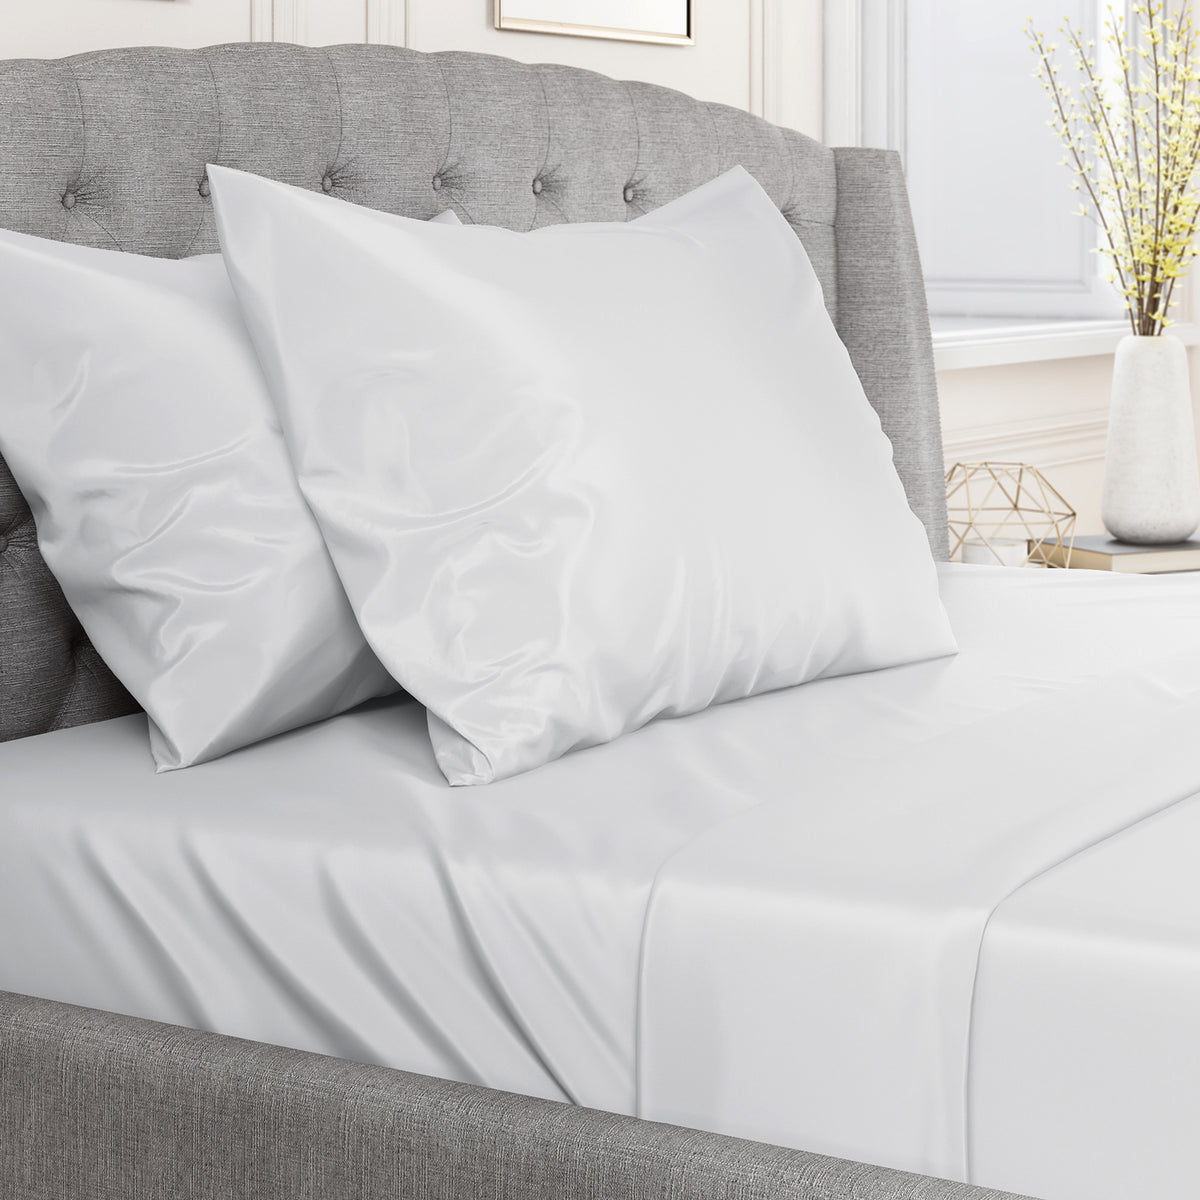 Bed made with White Silk Sheets by Mulberry Park SilksMulberry Park Silks Products 22 Momme Silk Sheet Set White Bed- Side